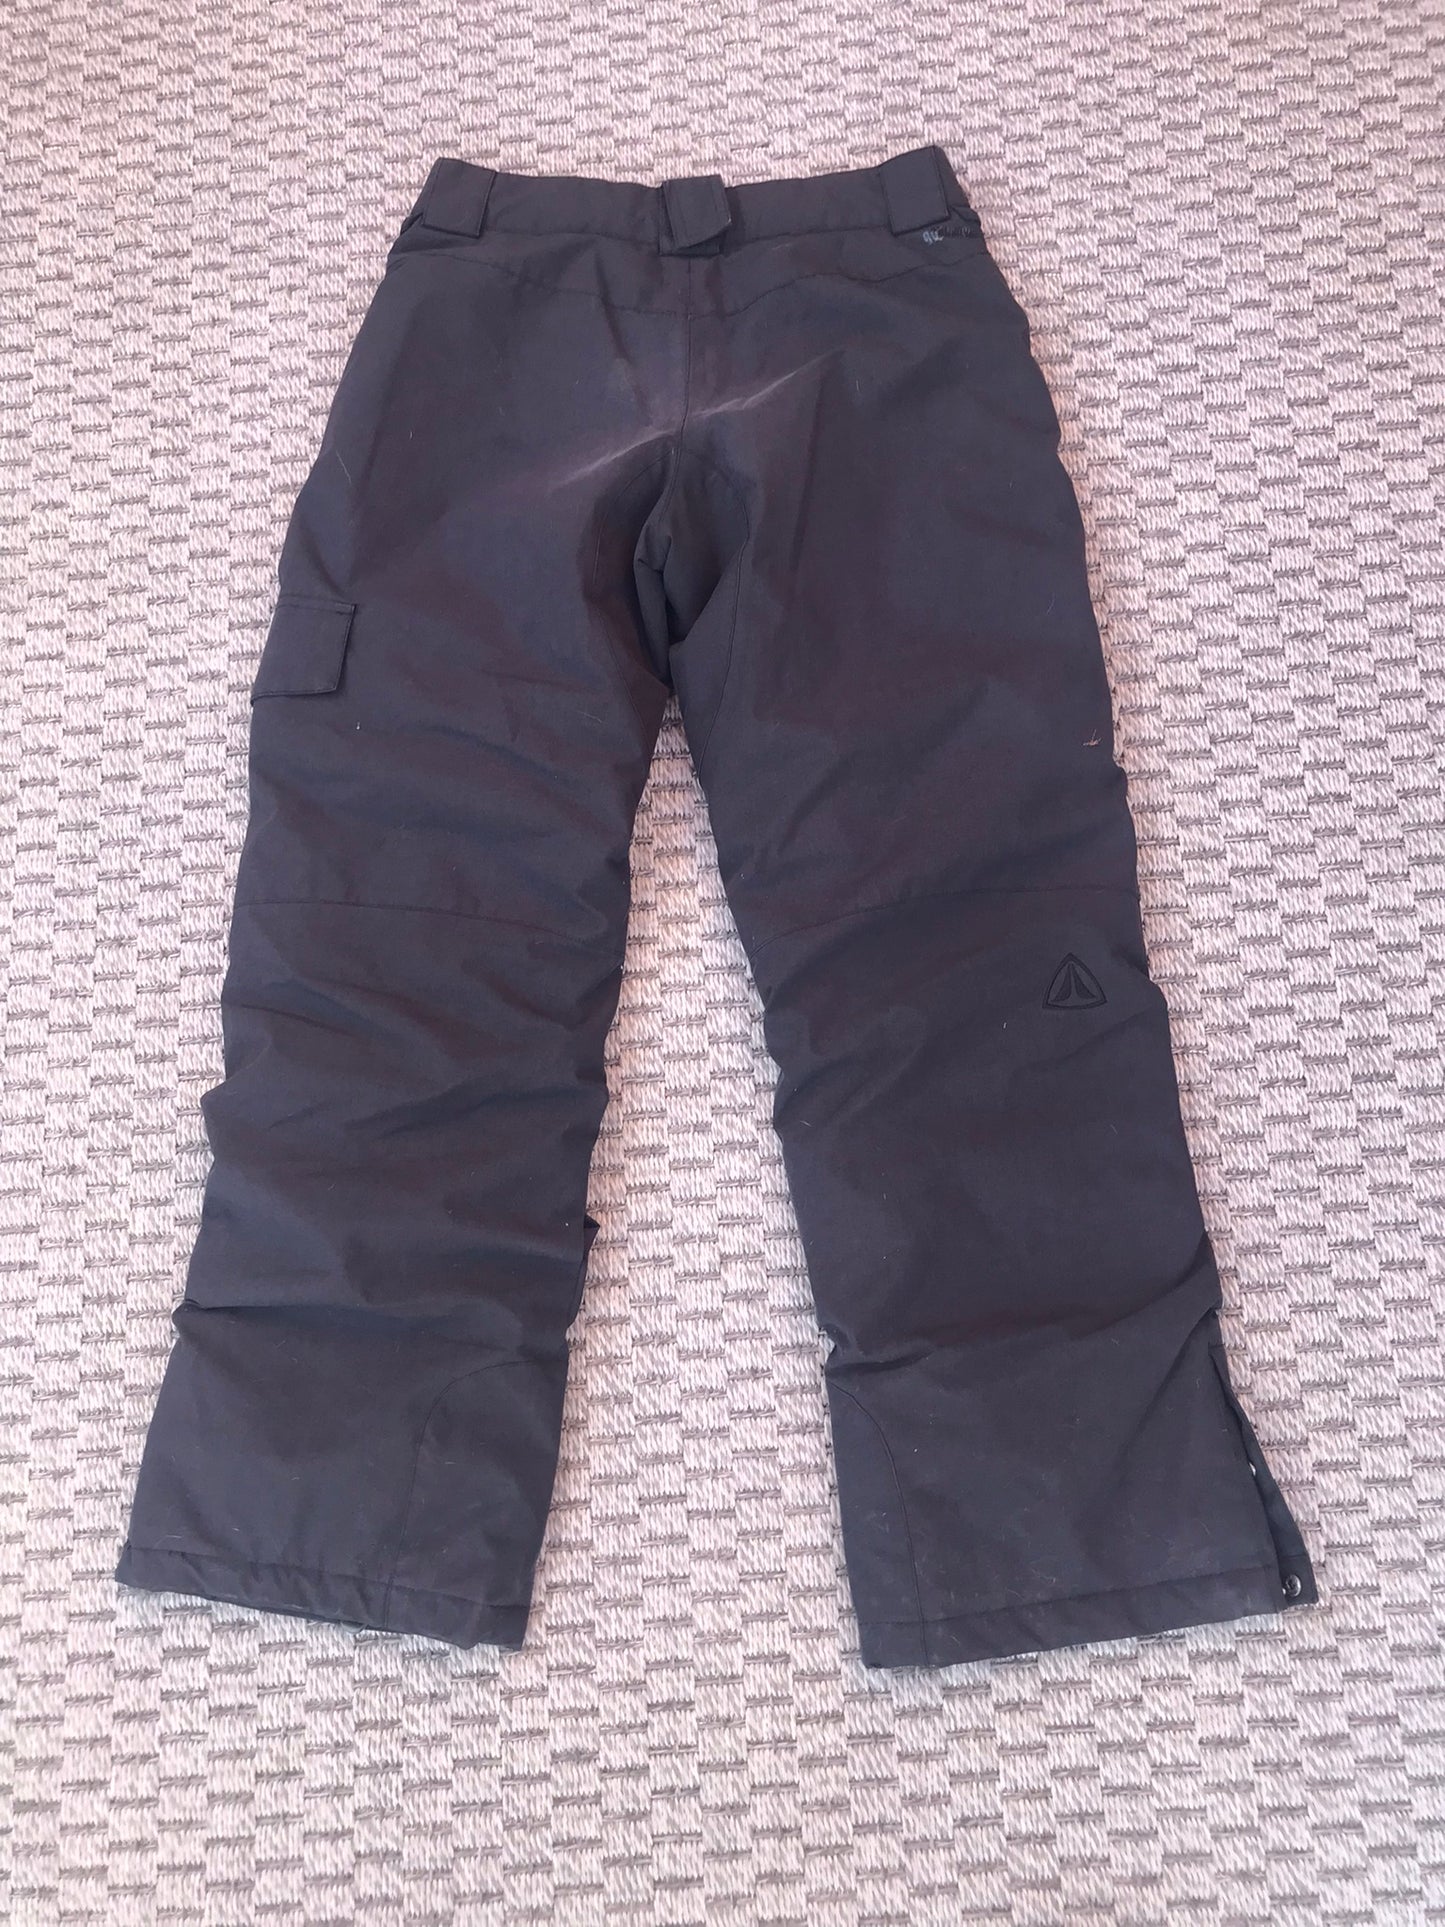 Snow Pants Child Size 12-14 Youth Firefly Smoke Grey Like New Outstanding Quality